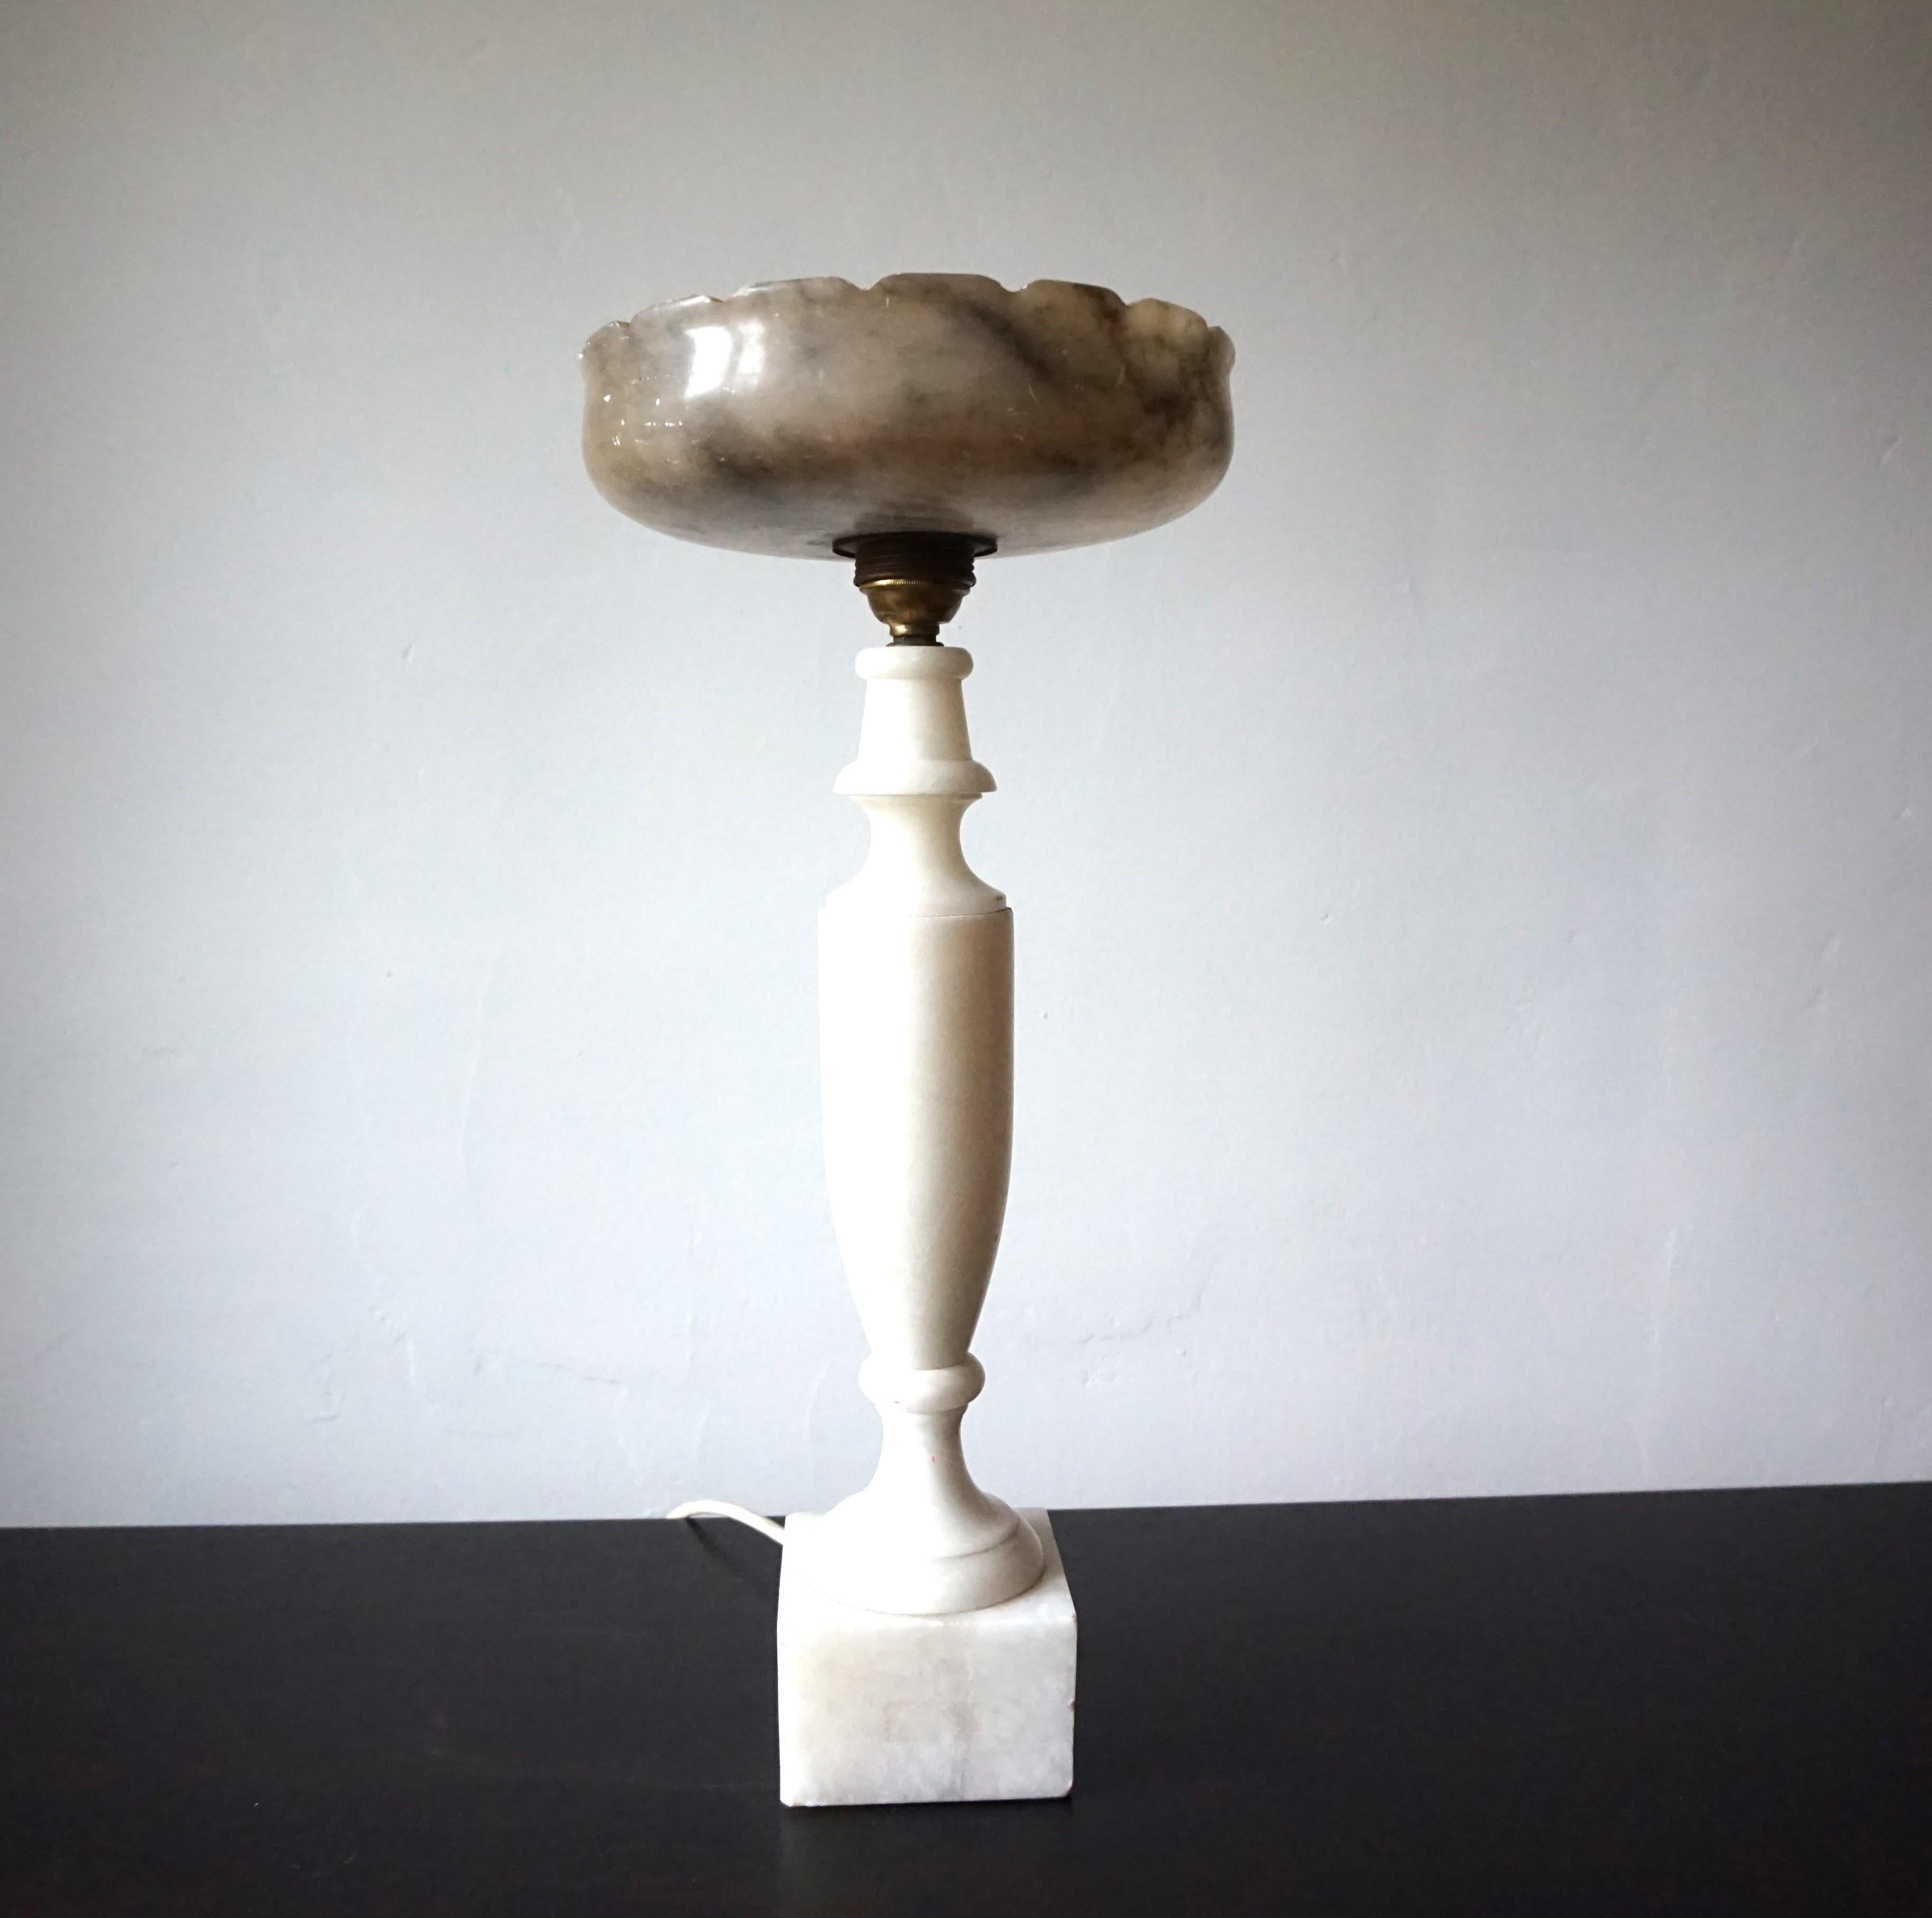 This extraordinary table lamp with a marble base in the shape of a narrow amphora, standing on a square base and a marble bowl, comes in very good condition. The light marble of the base harmonizes beautifully with the lamp head, which consists of a